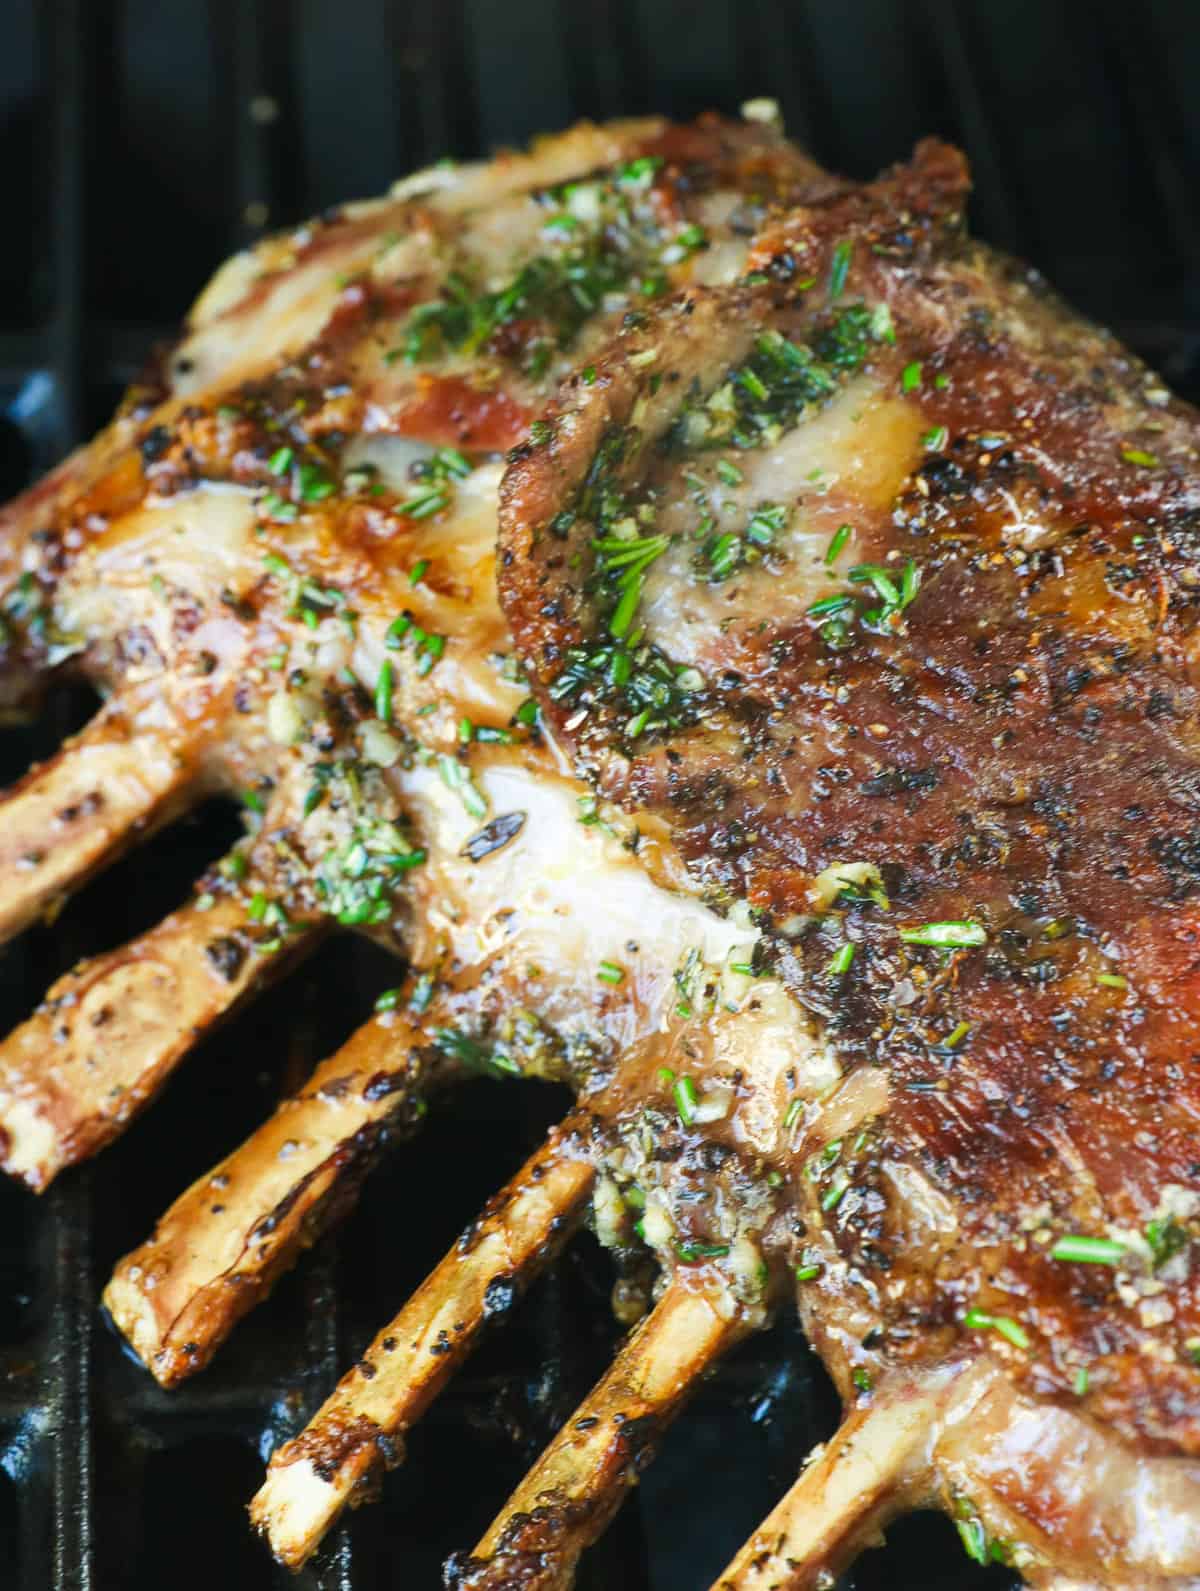 Rack of lamb ready to be taken off the grill